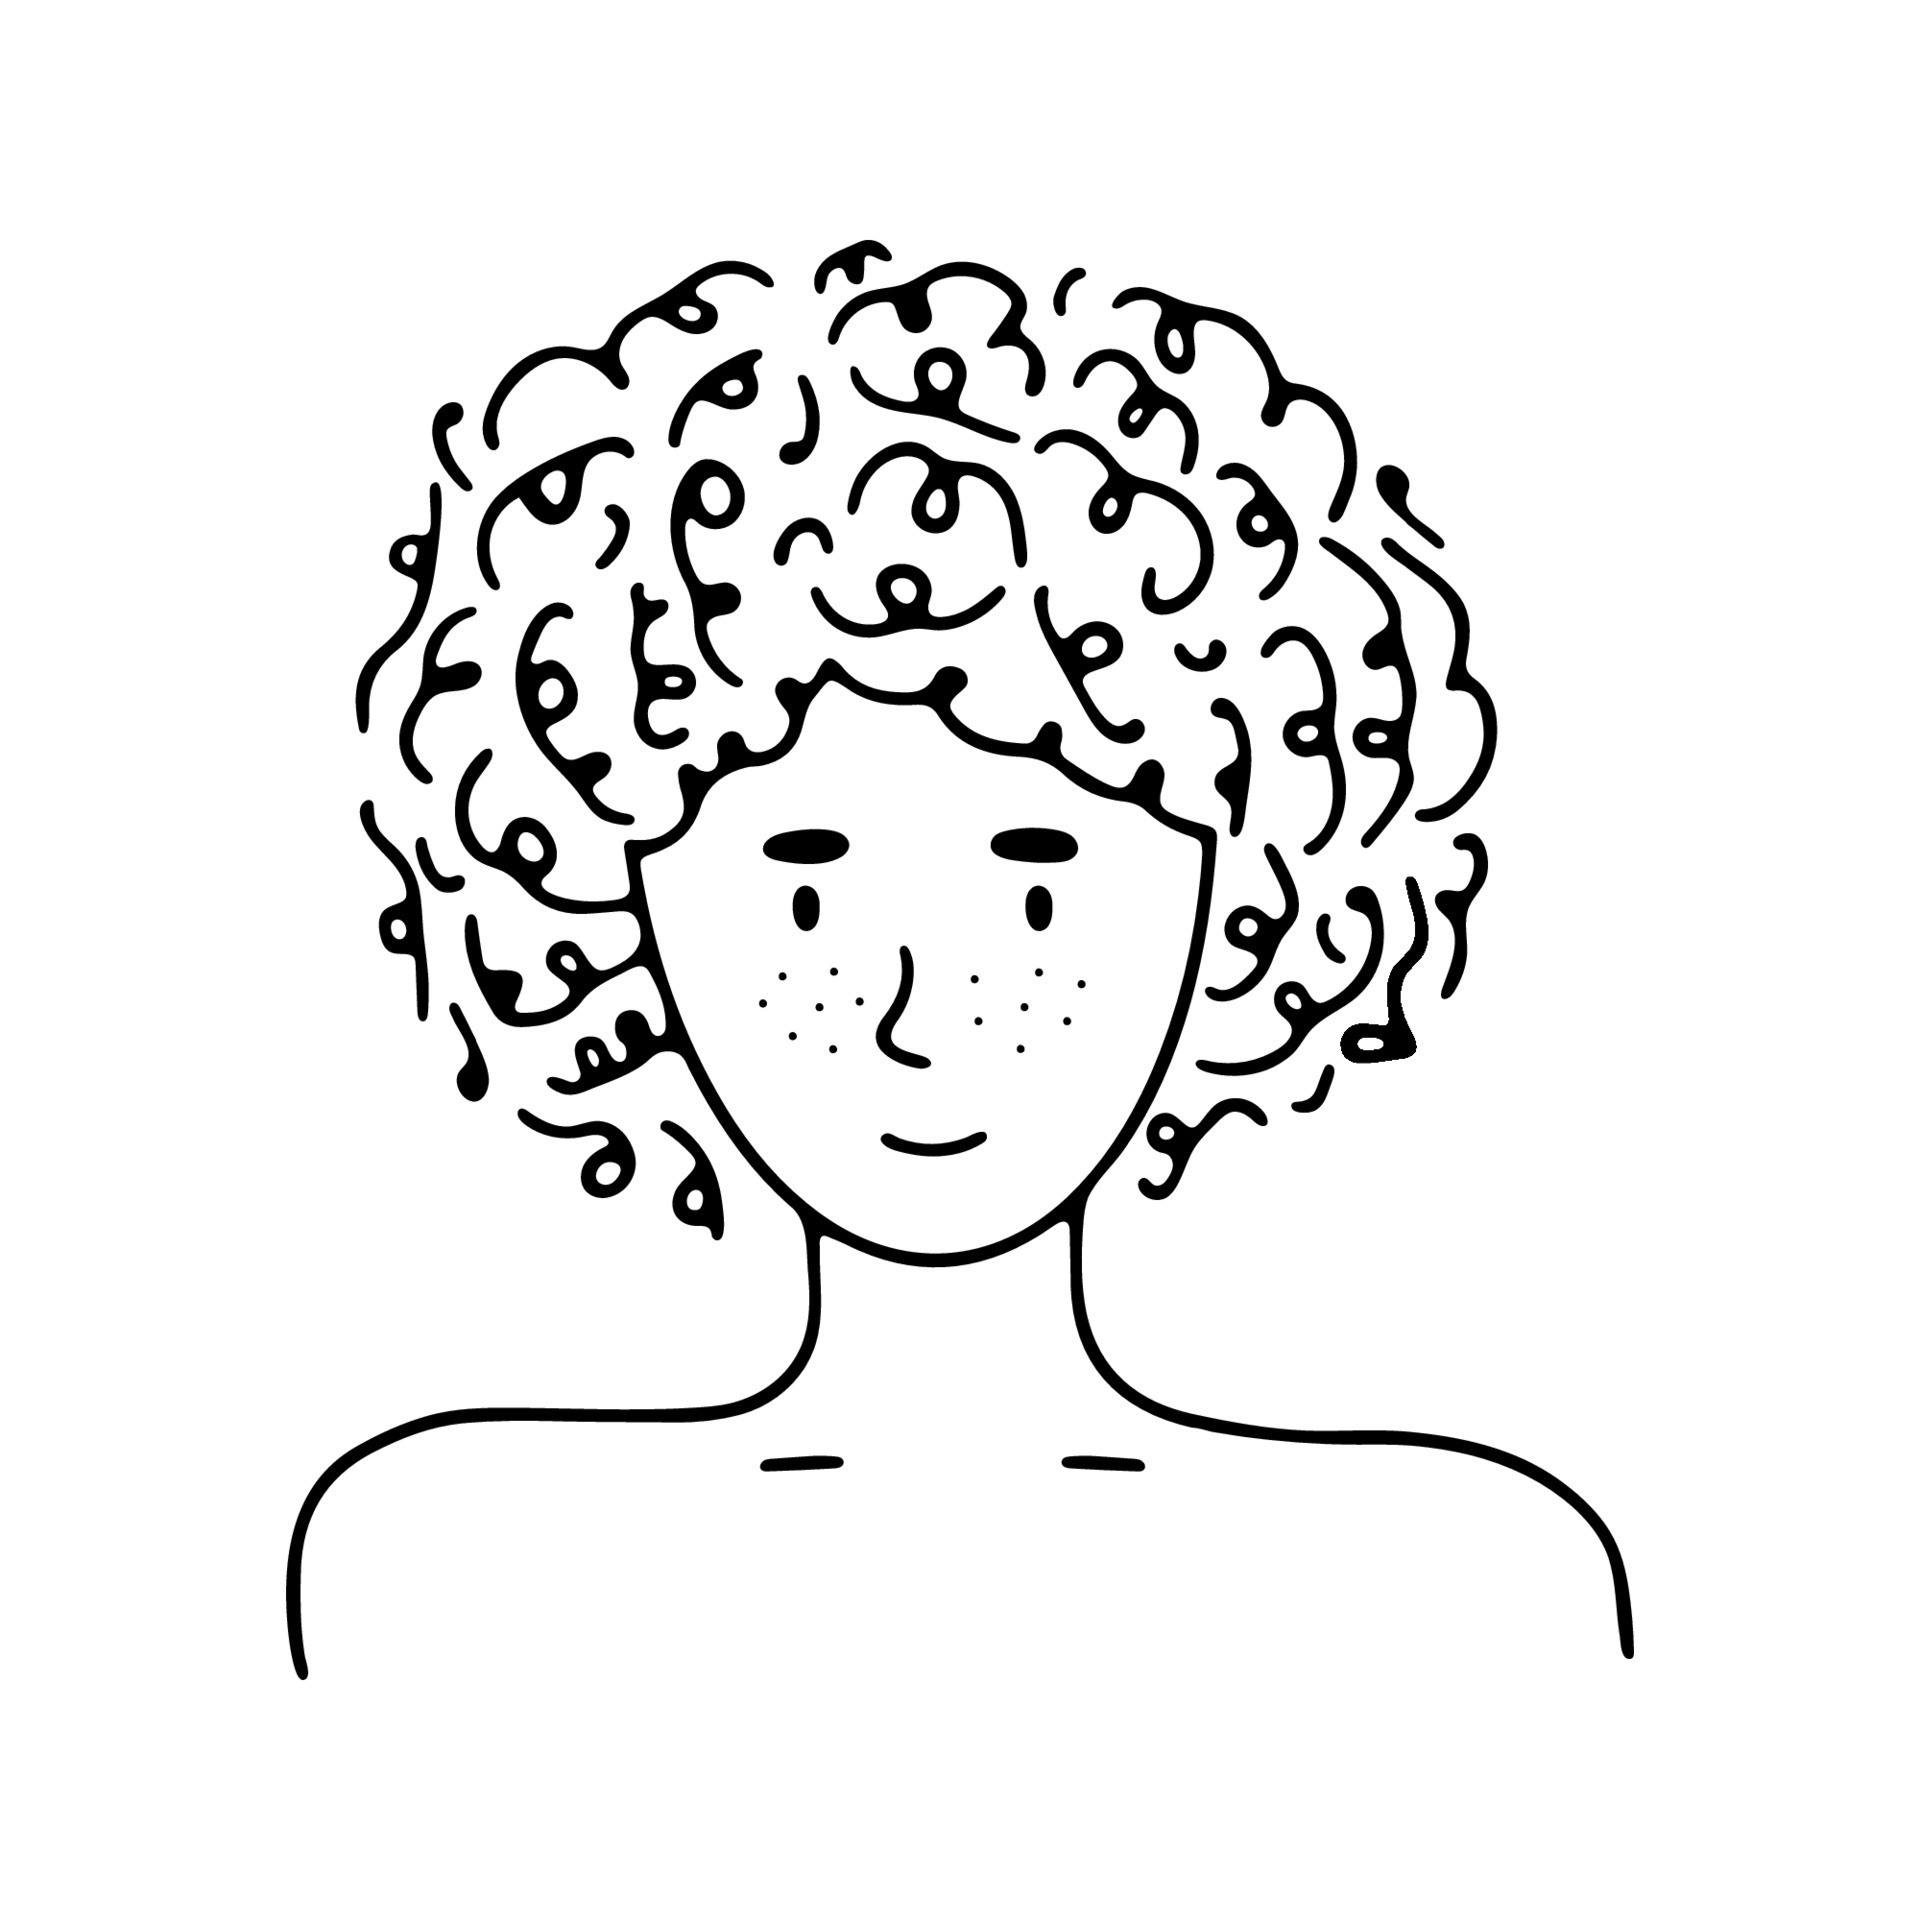 Portrait of doodle young person with curly hair. Man or woman, boy or girl.  Trendy hand drawn icon. Black and white vector illustration. Hand drawn  sketch. Perfect for social media, avatars, website